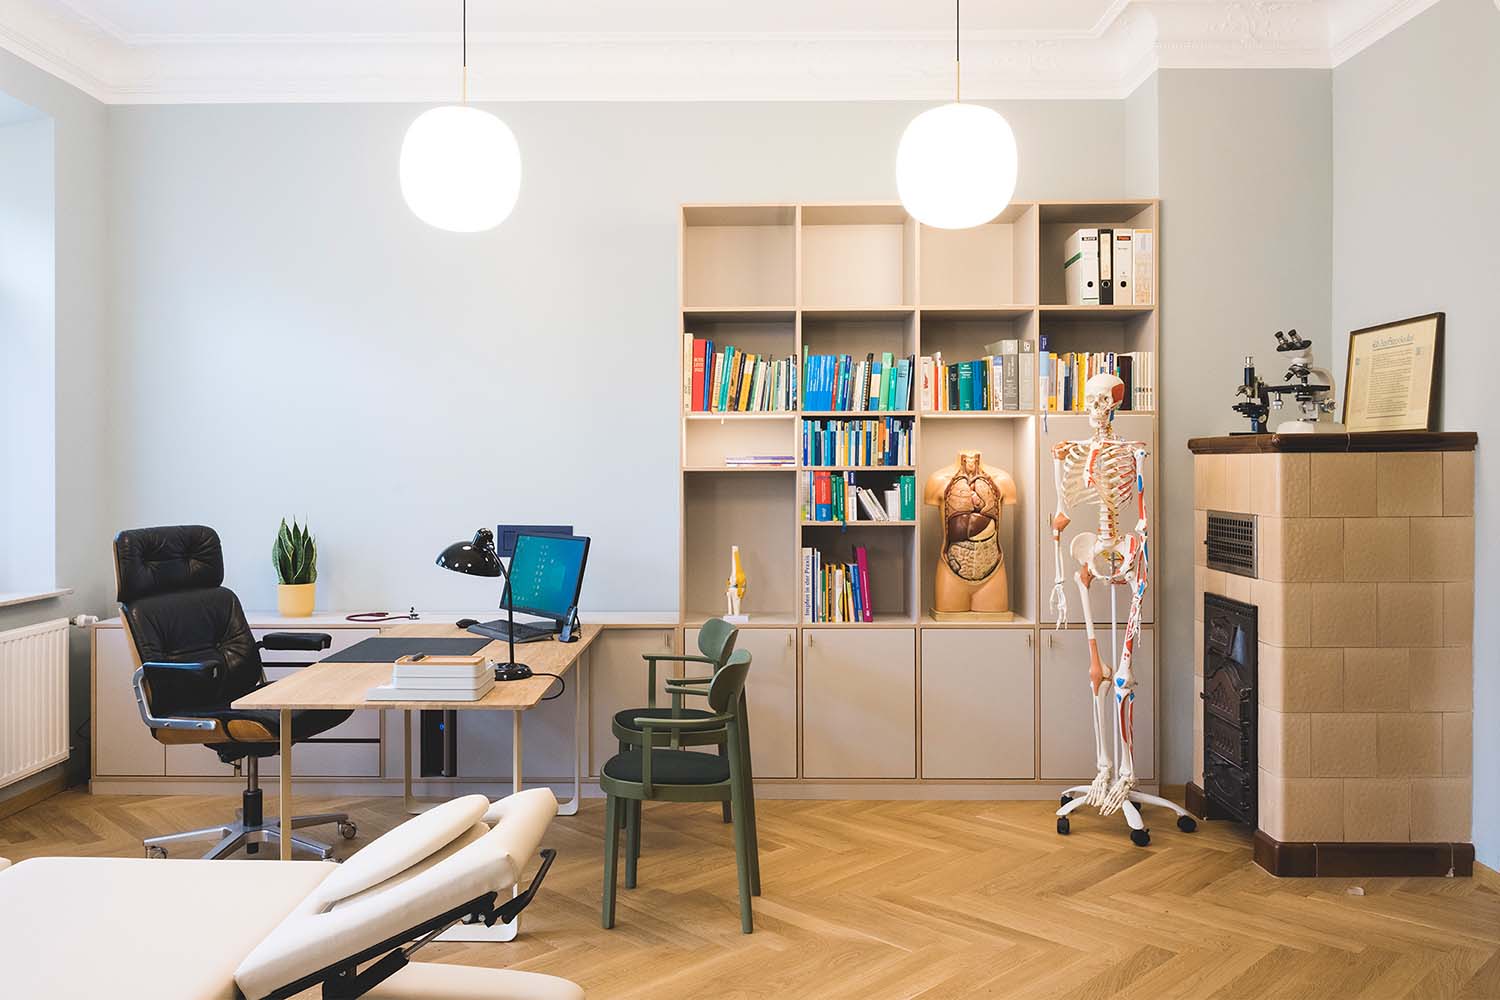 Dr. Sell and Dr. Stocker Practice Nuremberg, Germany by Markmus Design